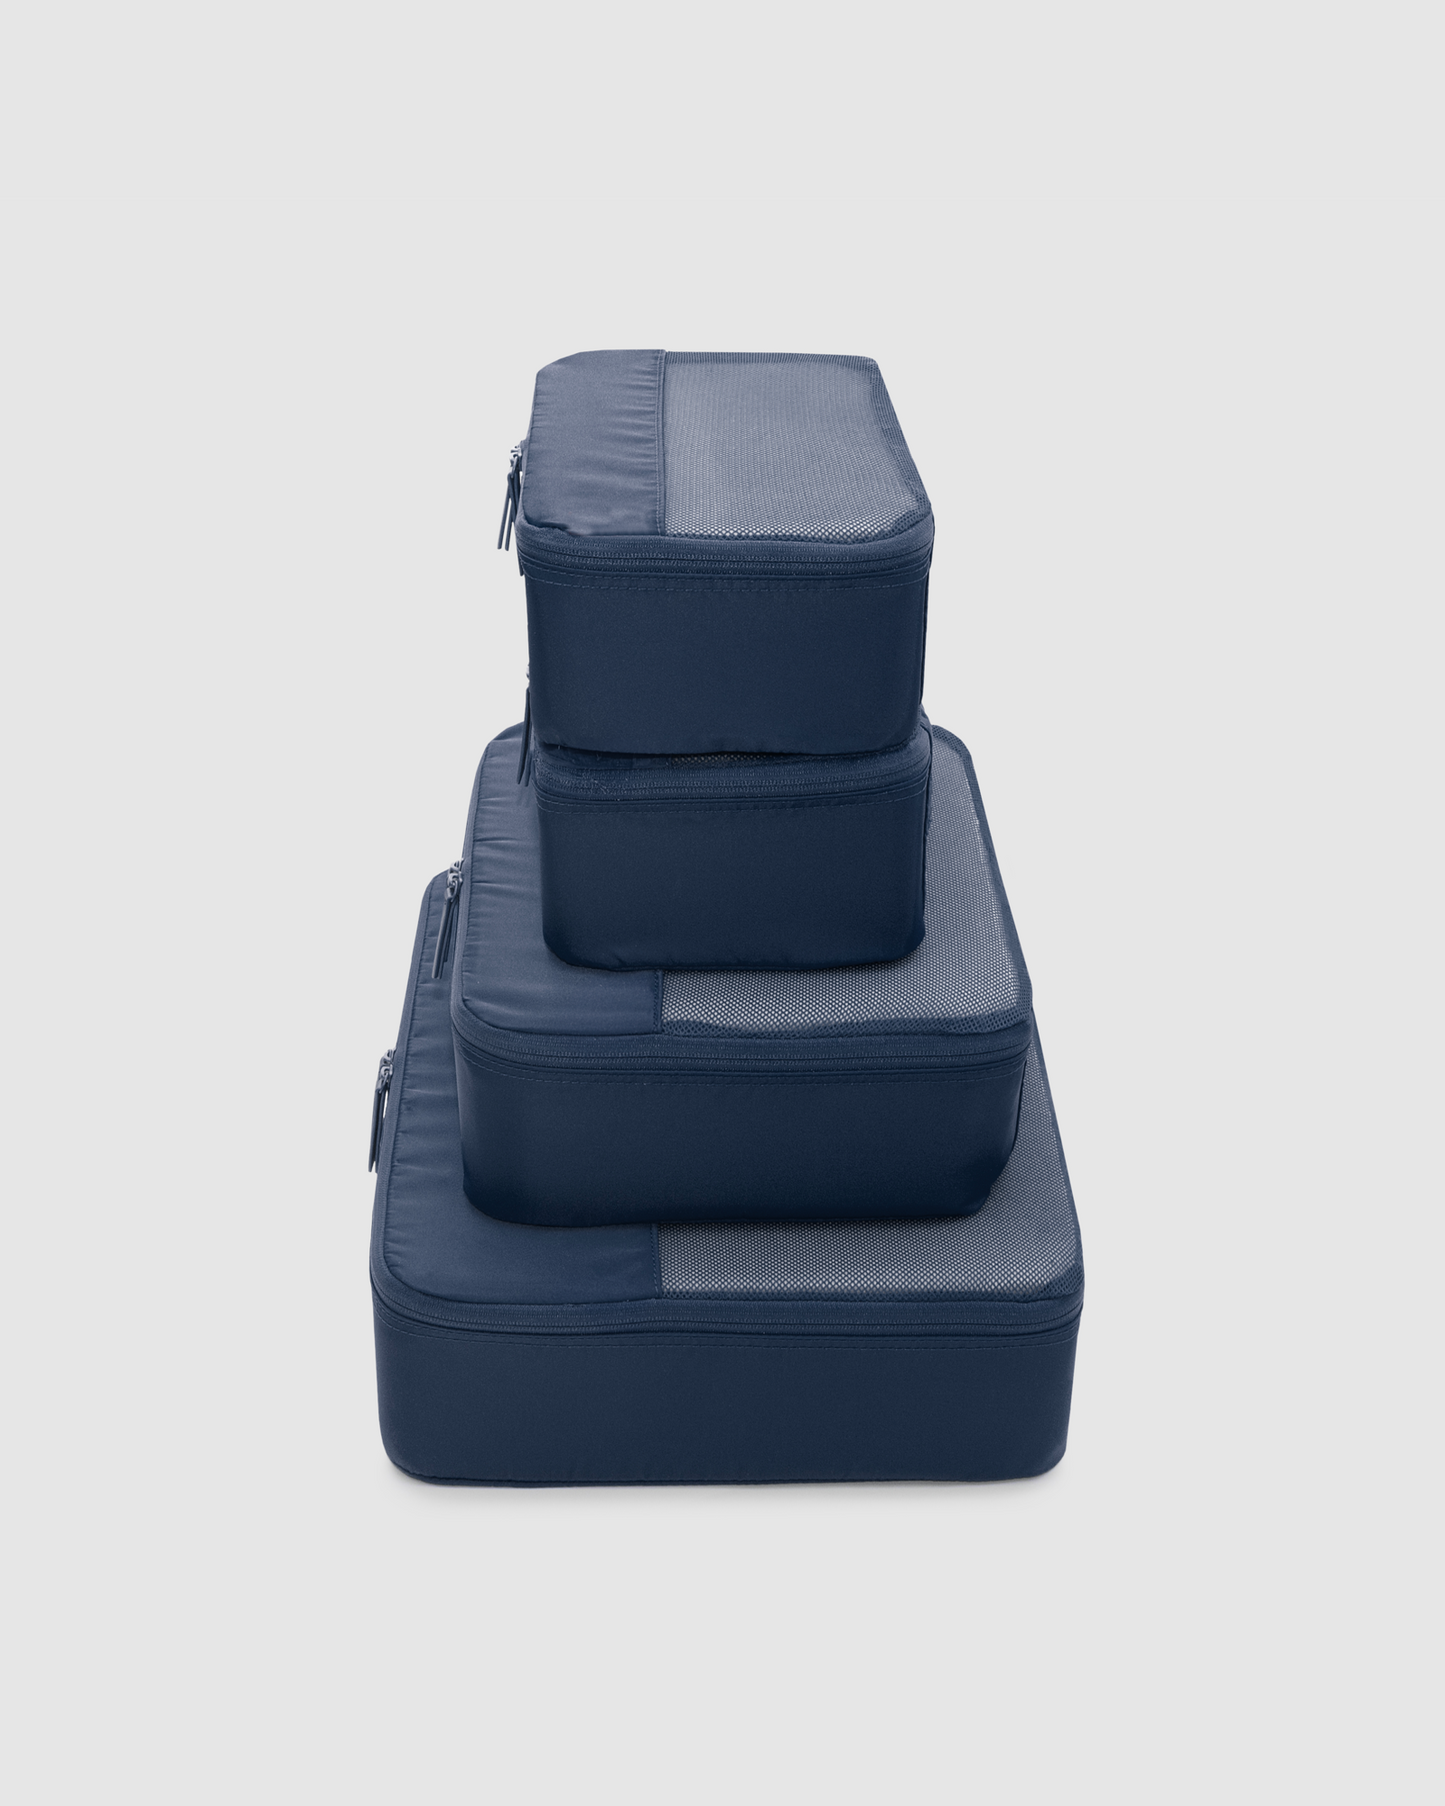 Marine 4 Piece Packing Cube